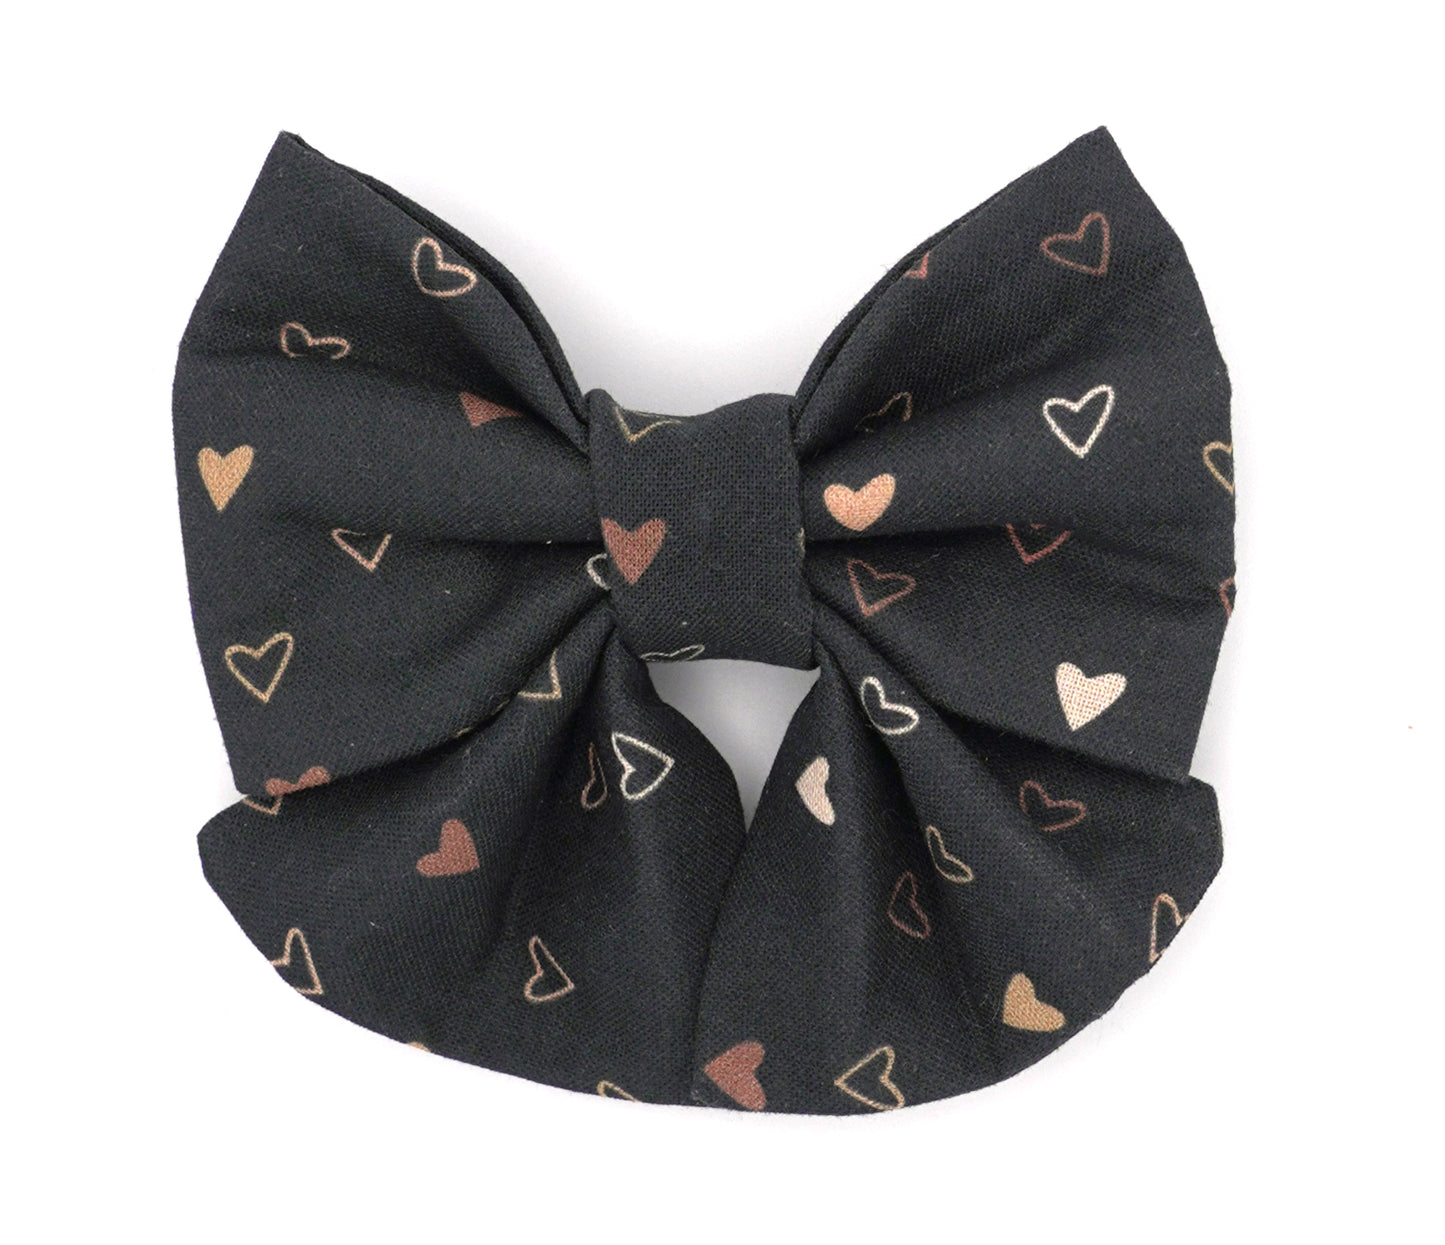 Handmade cotton bow tie with tails for dogs (or other pets). Elastic straps on back with snaps make it easy to add to collar, harness, or leash. Black background with dark and light orange hearts.